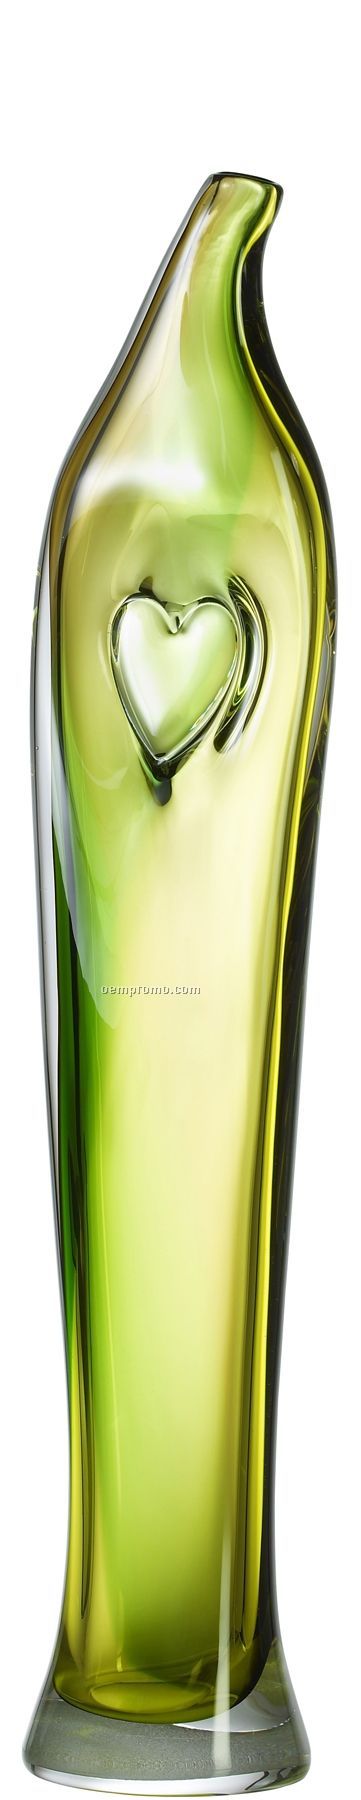 Bali Tall Glass Bud Vase With Heart Inset By Kjell Engman